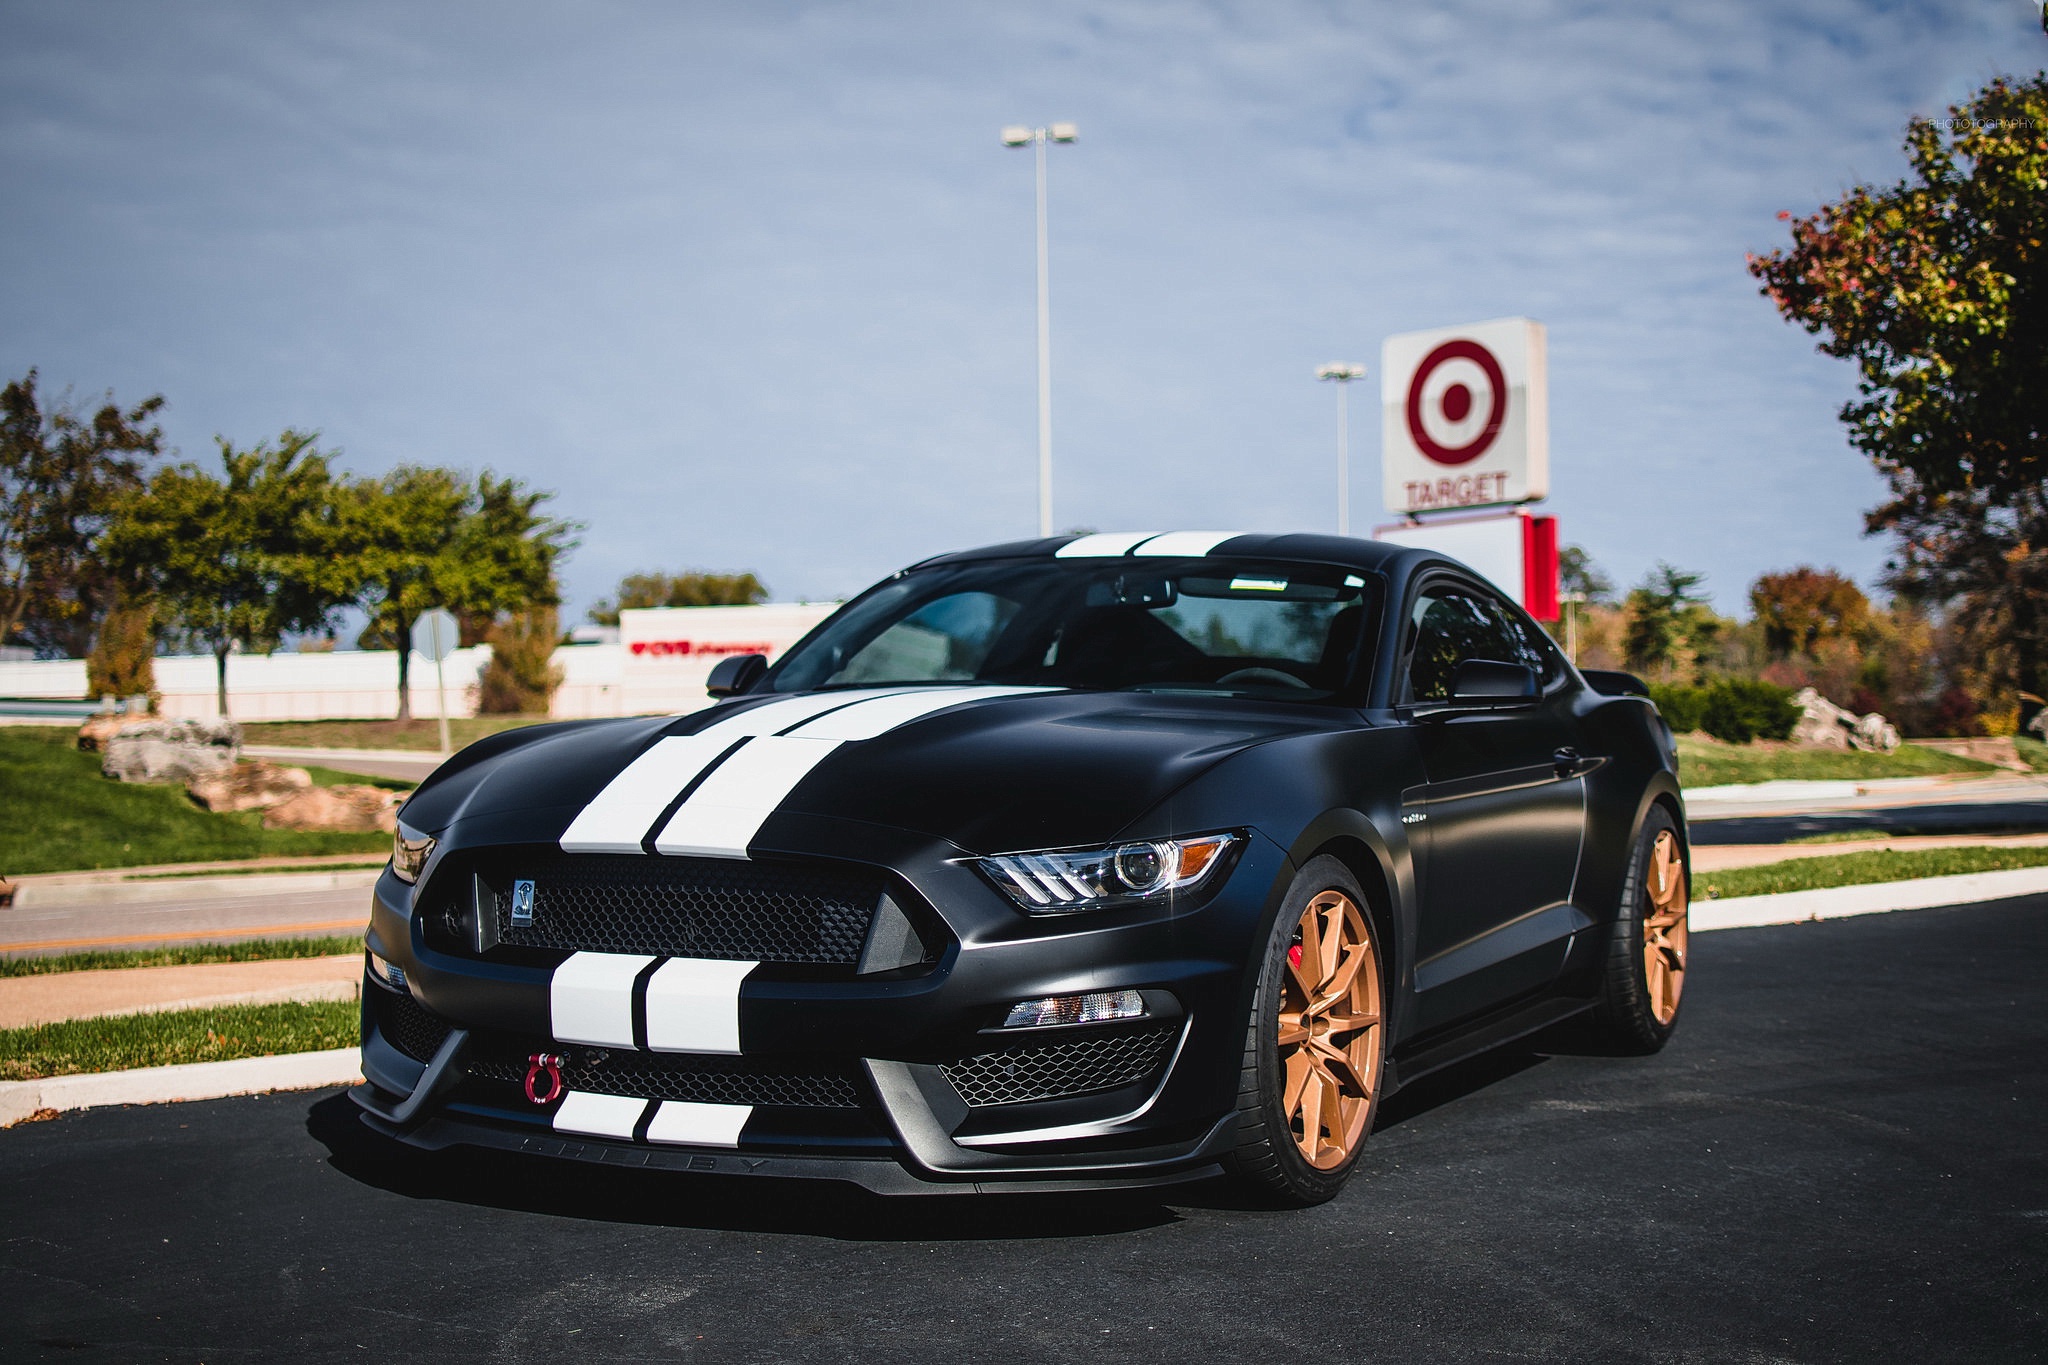 Vehicles Ford Mustang Shelby GT350 HD Wallpaper | Background Image